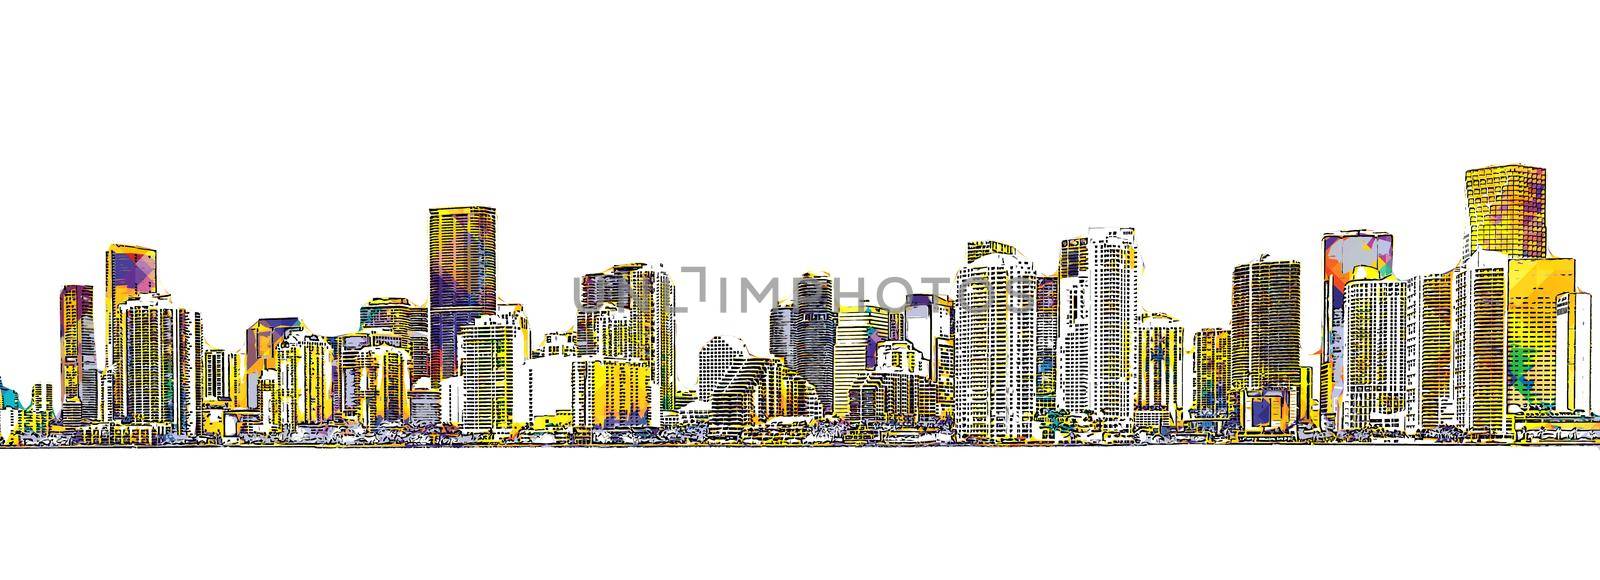 Pop art drawing of Miami Downtown skyline on white background by Mariakray